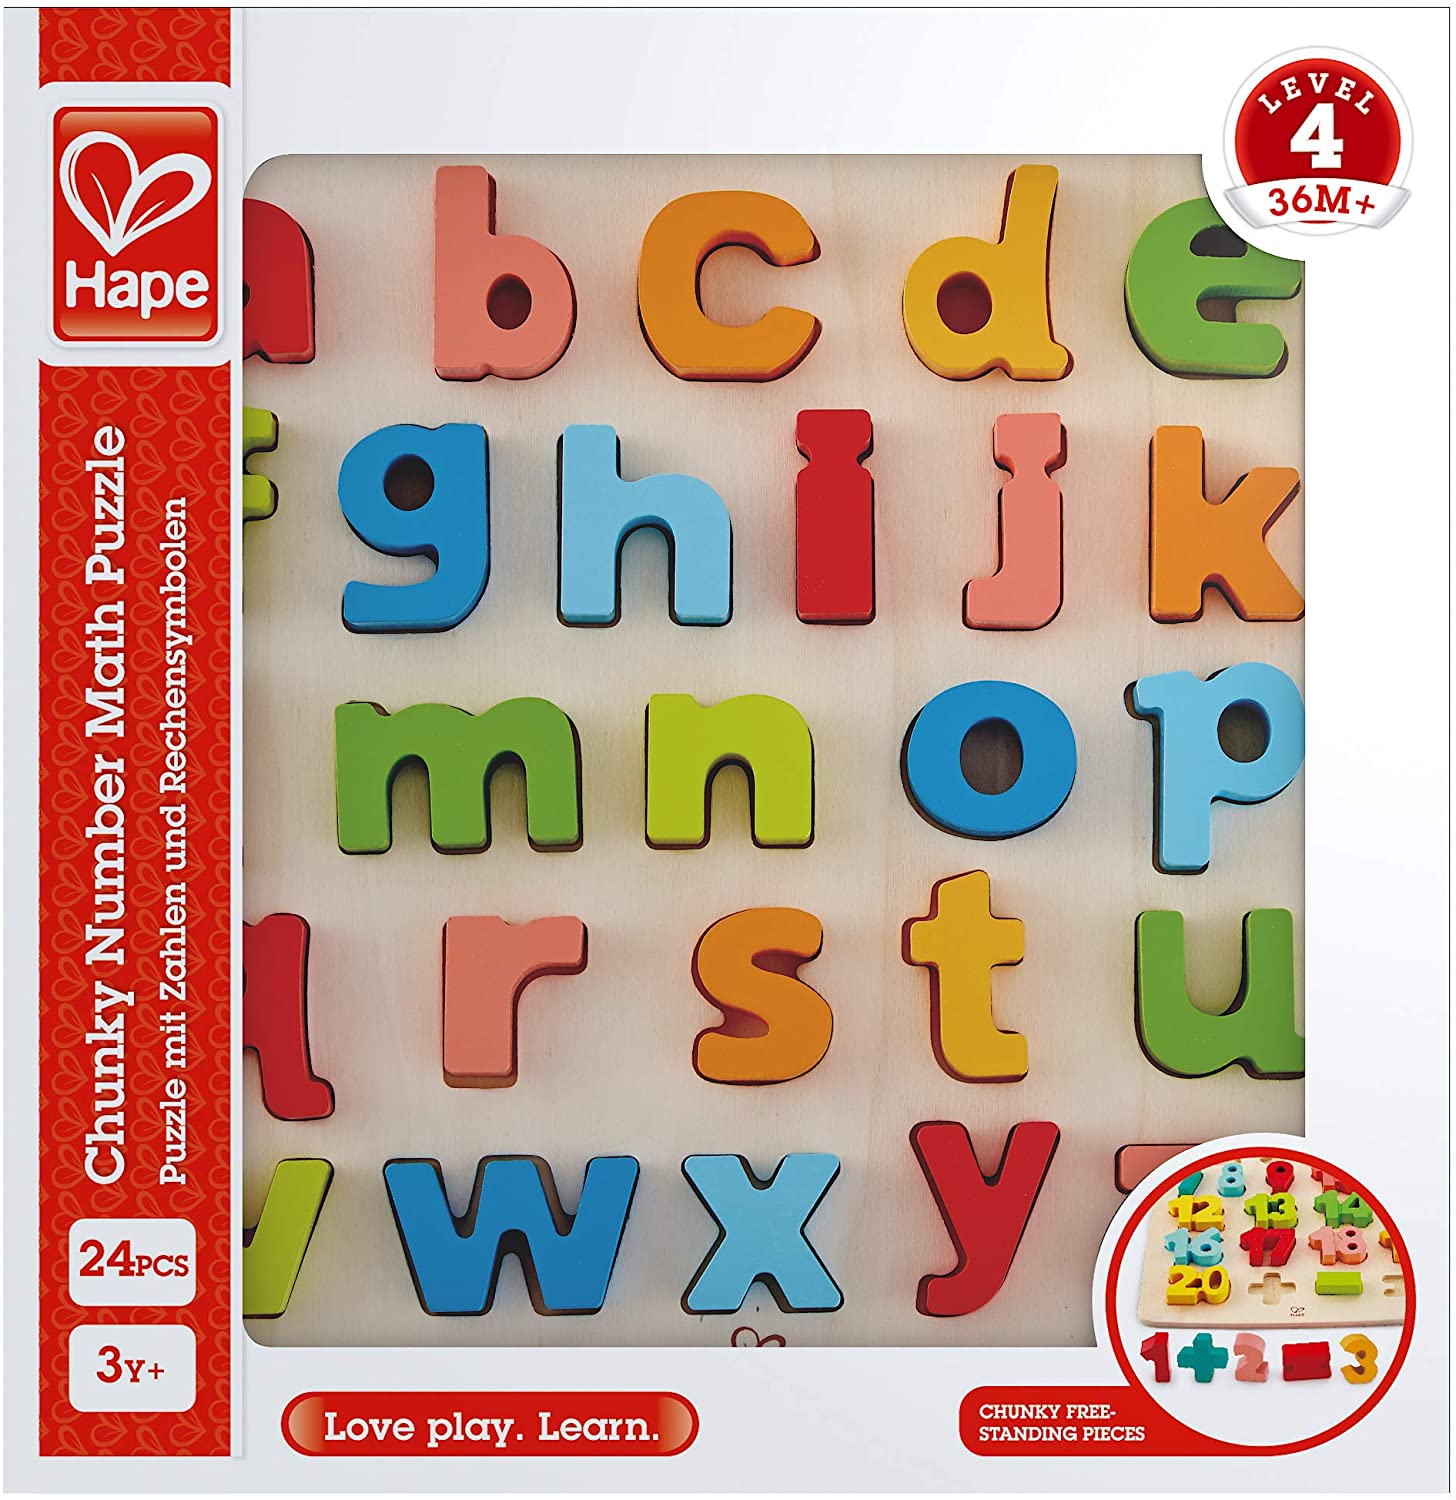 (OPEN BOX) Hape Chunky Lowercase Alphabet Letter Kids Early Learning and Spelling Word Blocks Puzzle Game for Toddlers and Children, Multicolor